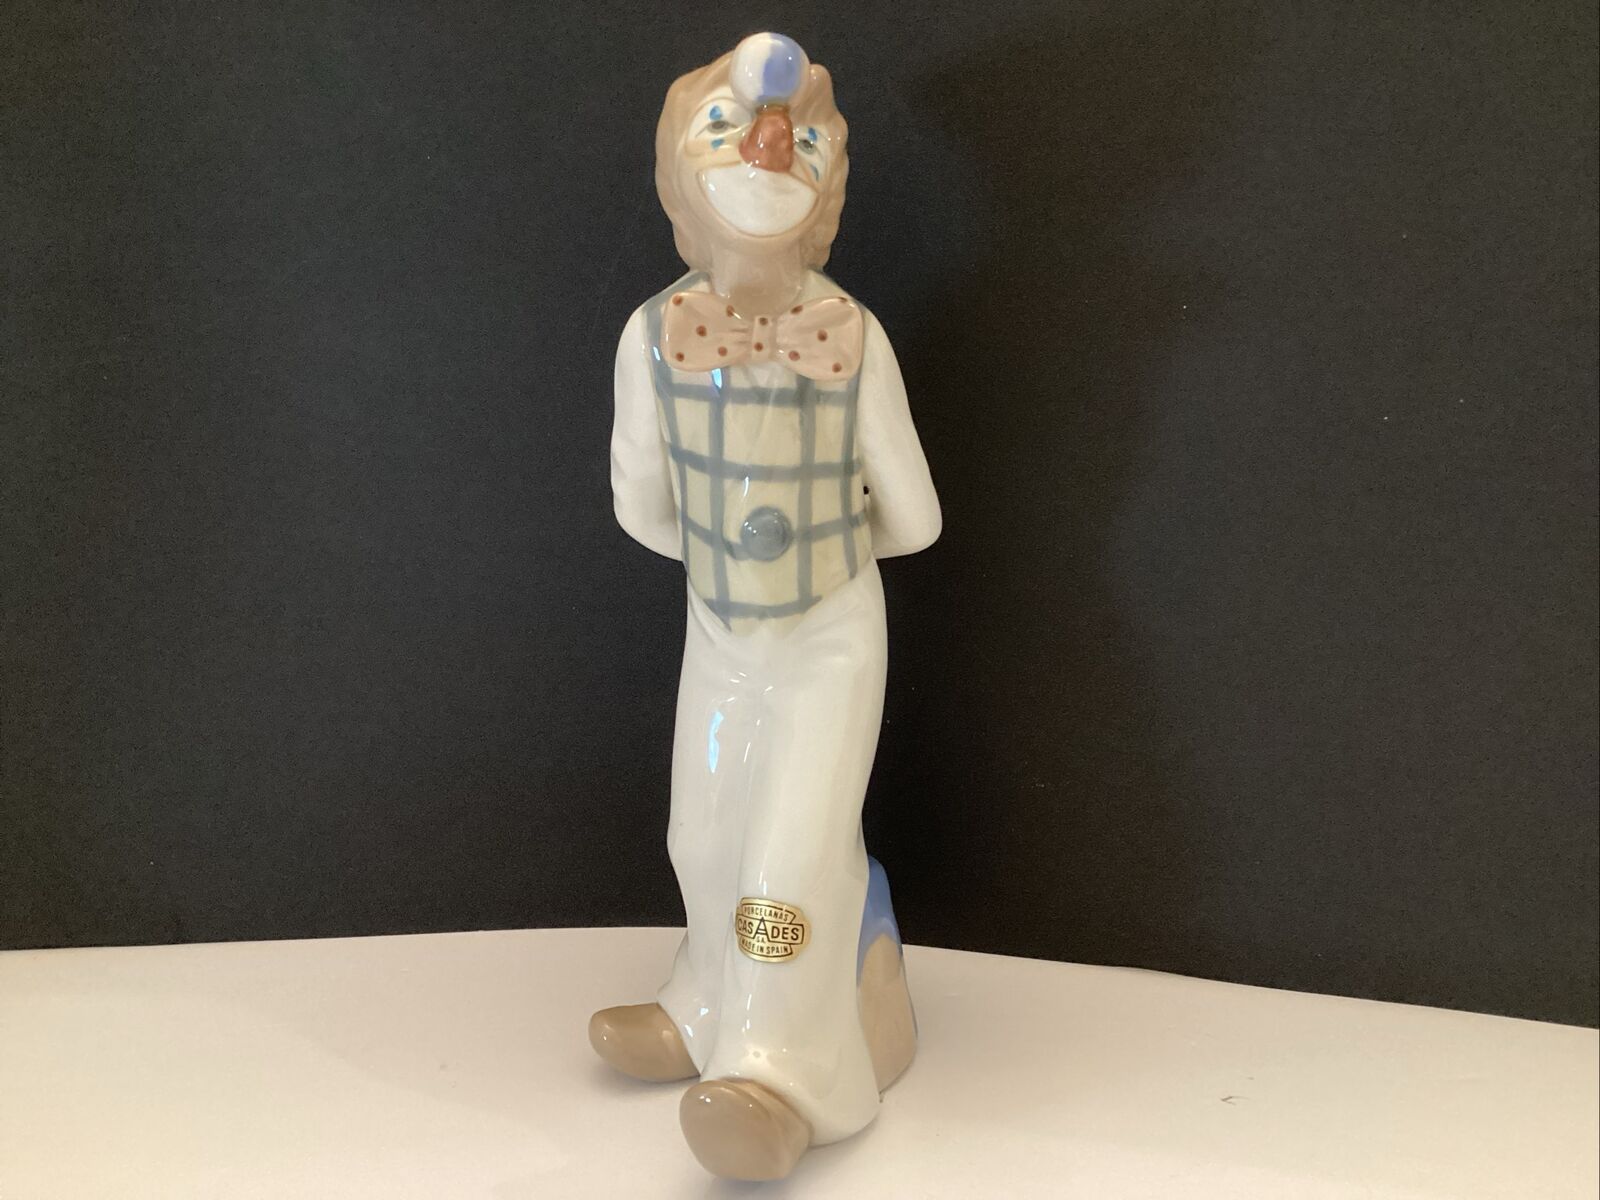 Casades Circus Clown  Statue Figurine.  Made In Spain And Stands 9.5” Tall